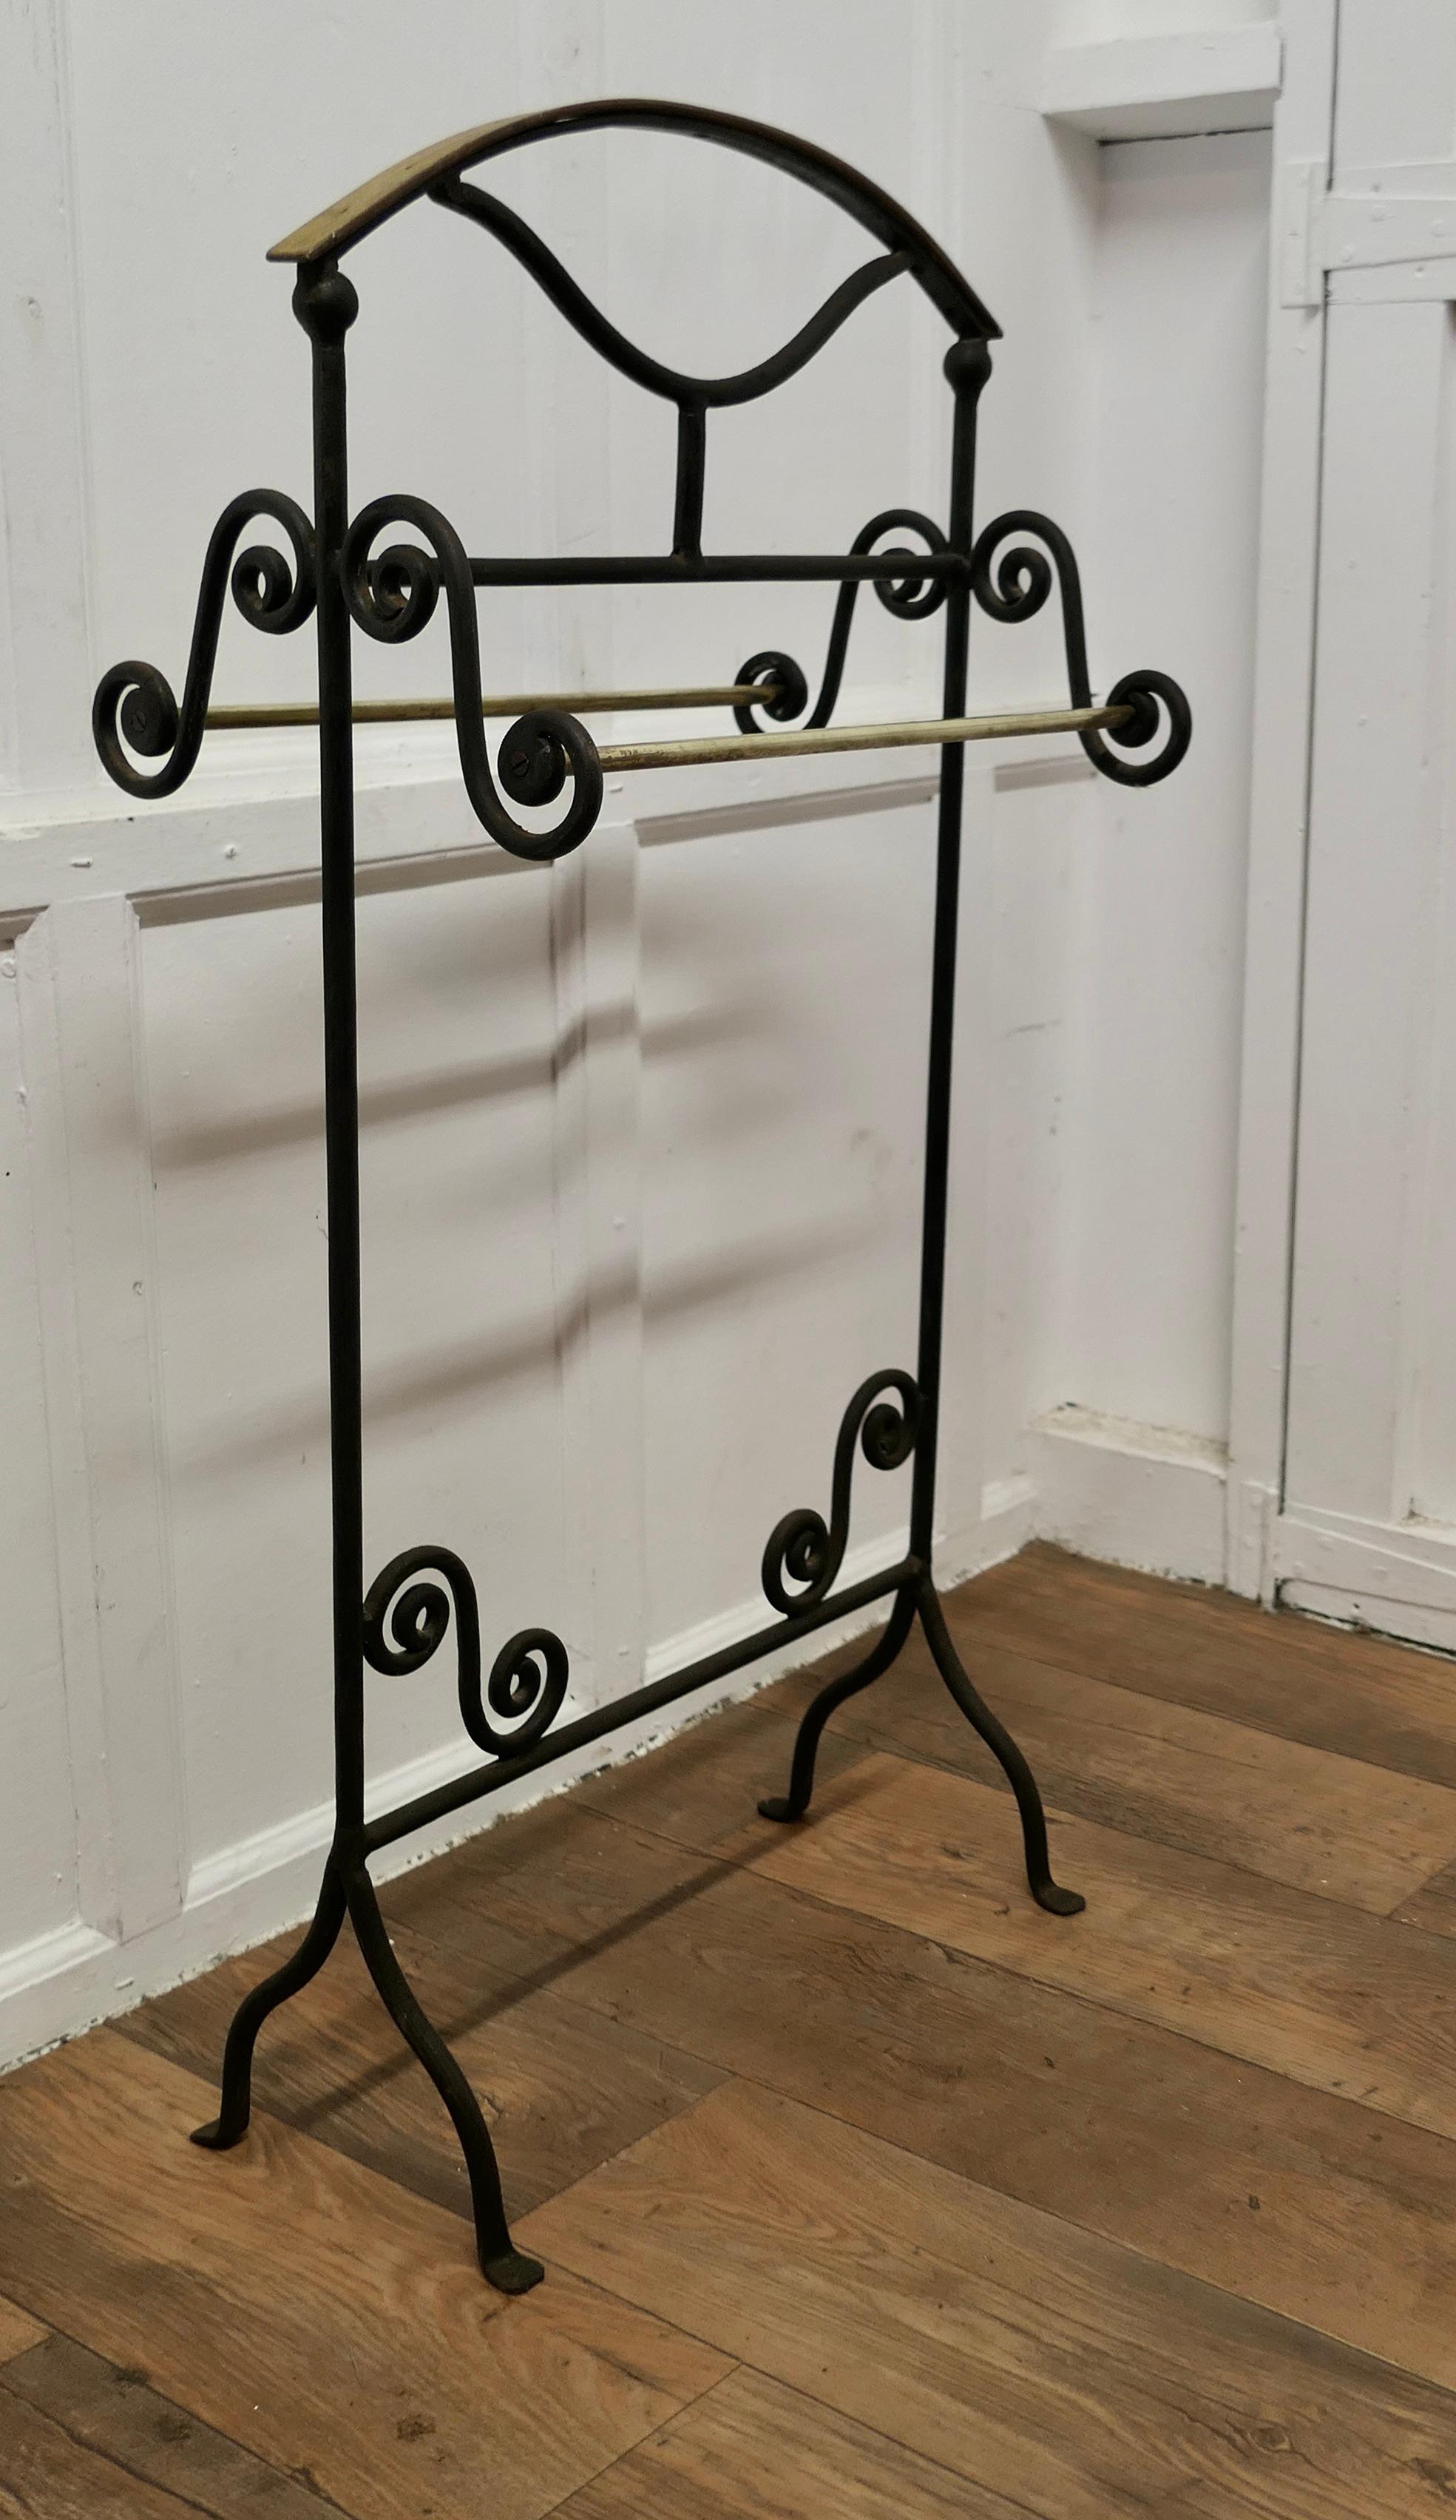 Wrought Iron Towel Rail or Clothes Airer

The Towel Rail or Clothes Airer has pretty scroll shaped sides, with an arched beech top rail it has brass hanging rails on either side,  the towel rail is painted in black. 
All in good condition and very